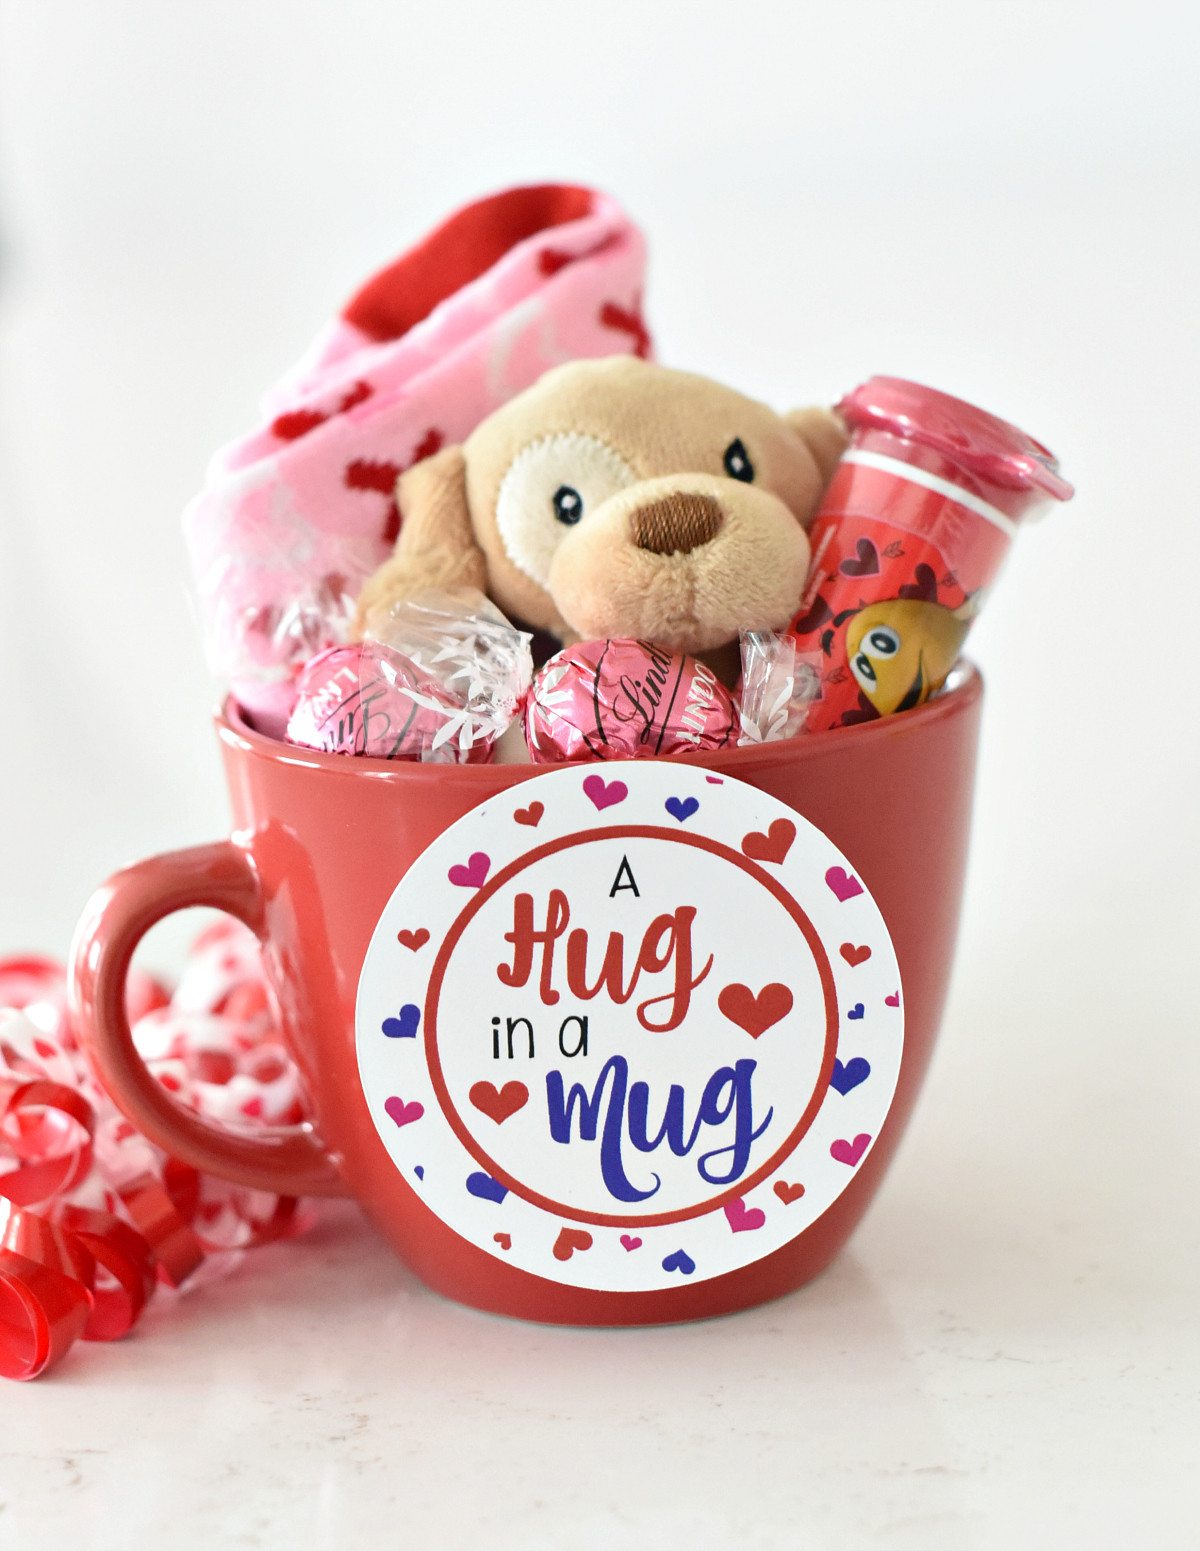 Ideas For Valentines Gift
 Cute Valentine s Day Gift Idea RED iculous Basket